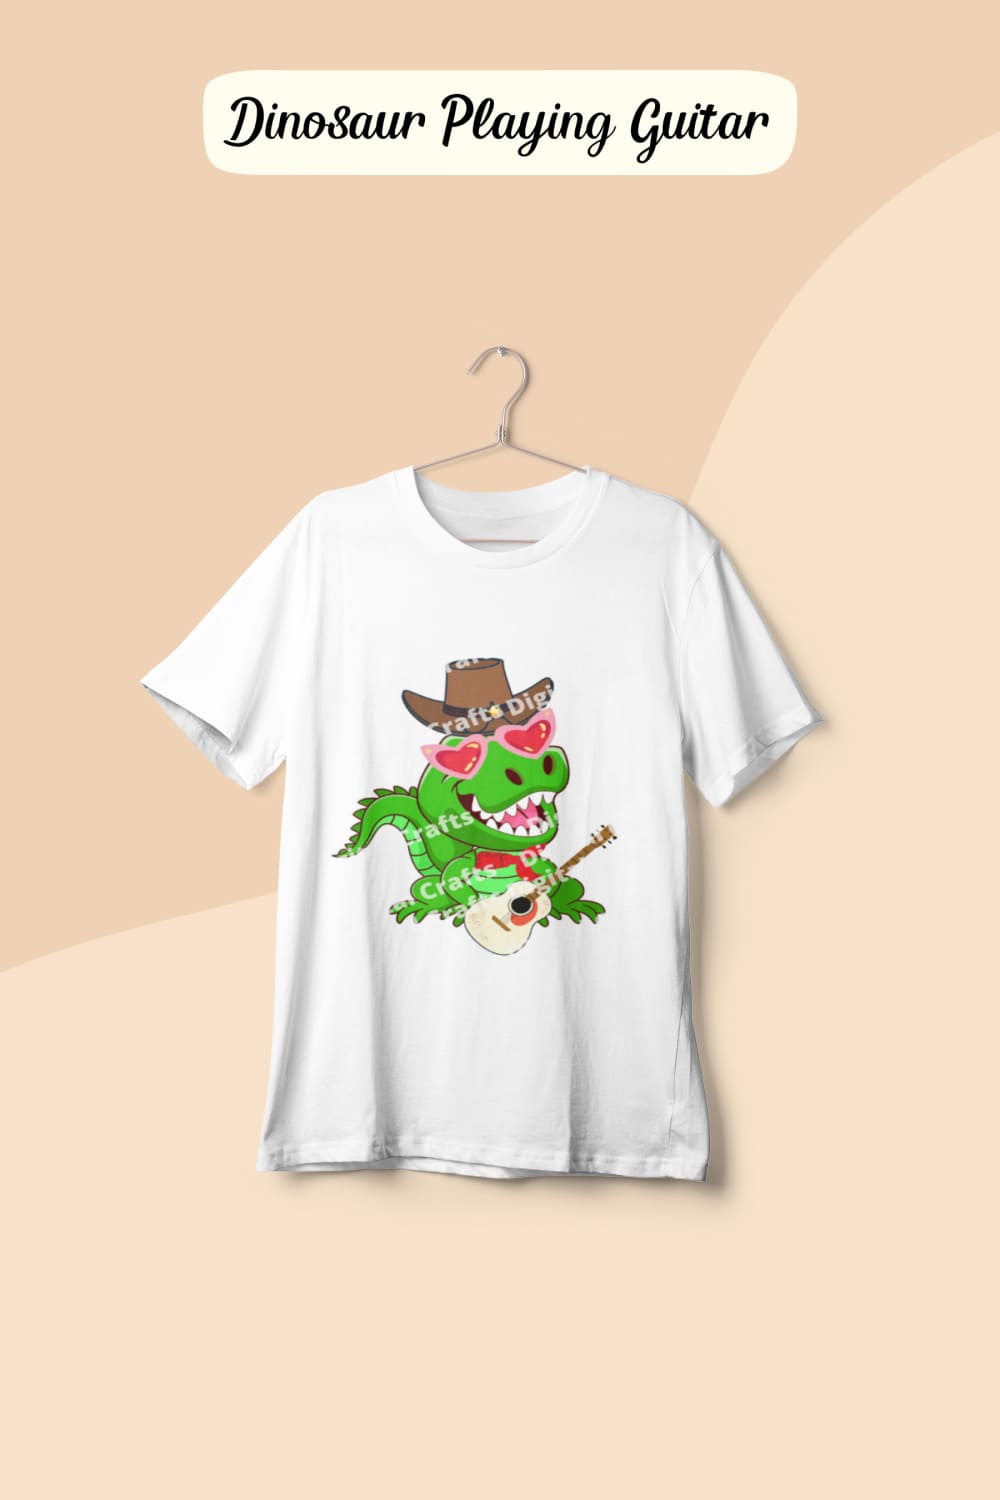 Image of a white t-shirt with an adorable print of a dinosaur wearing a cowboy hat and with a guitar.